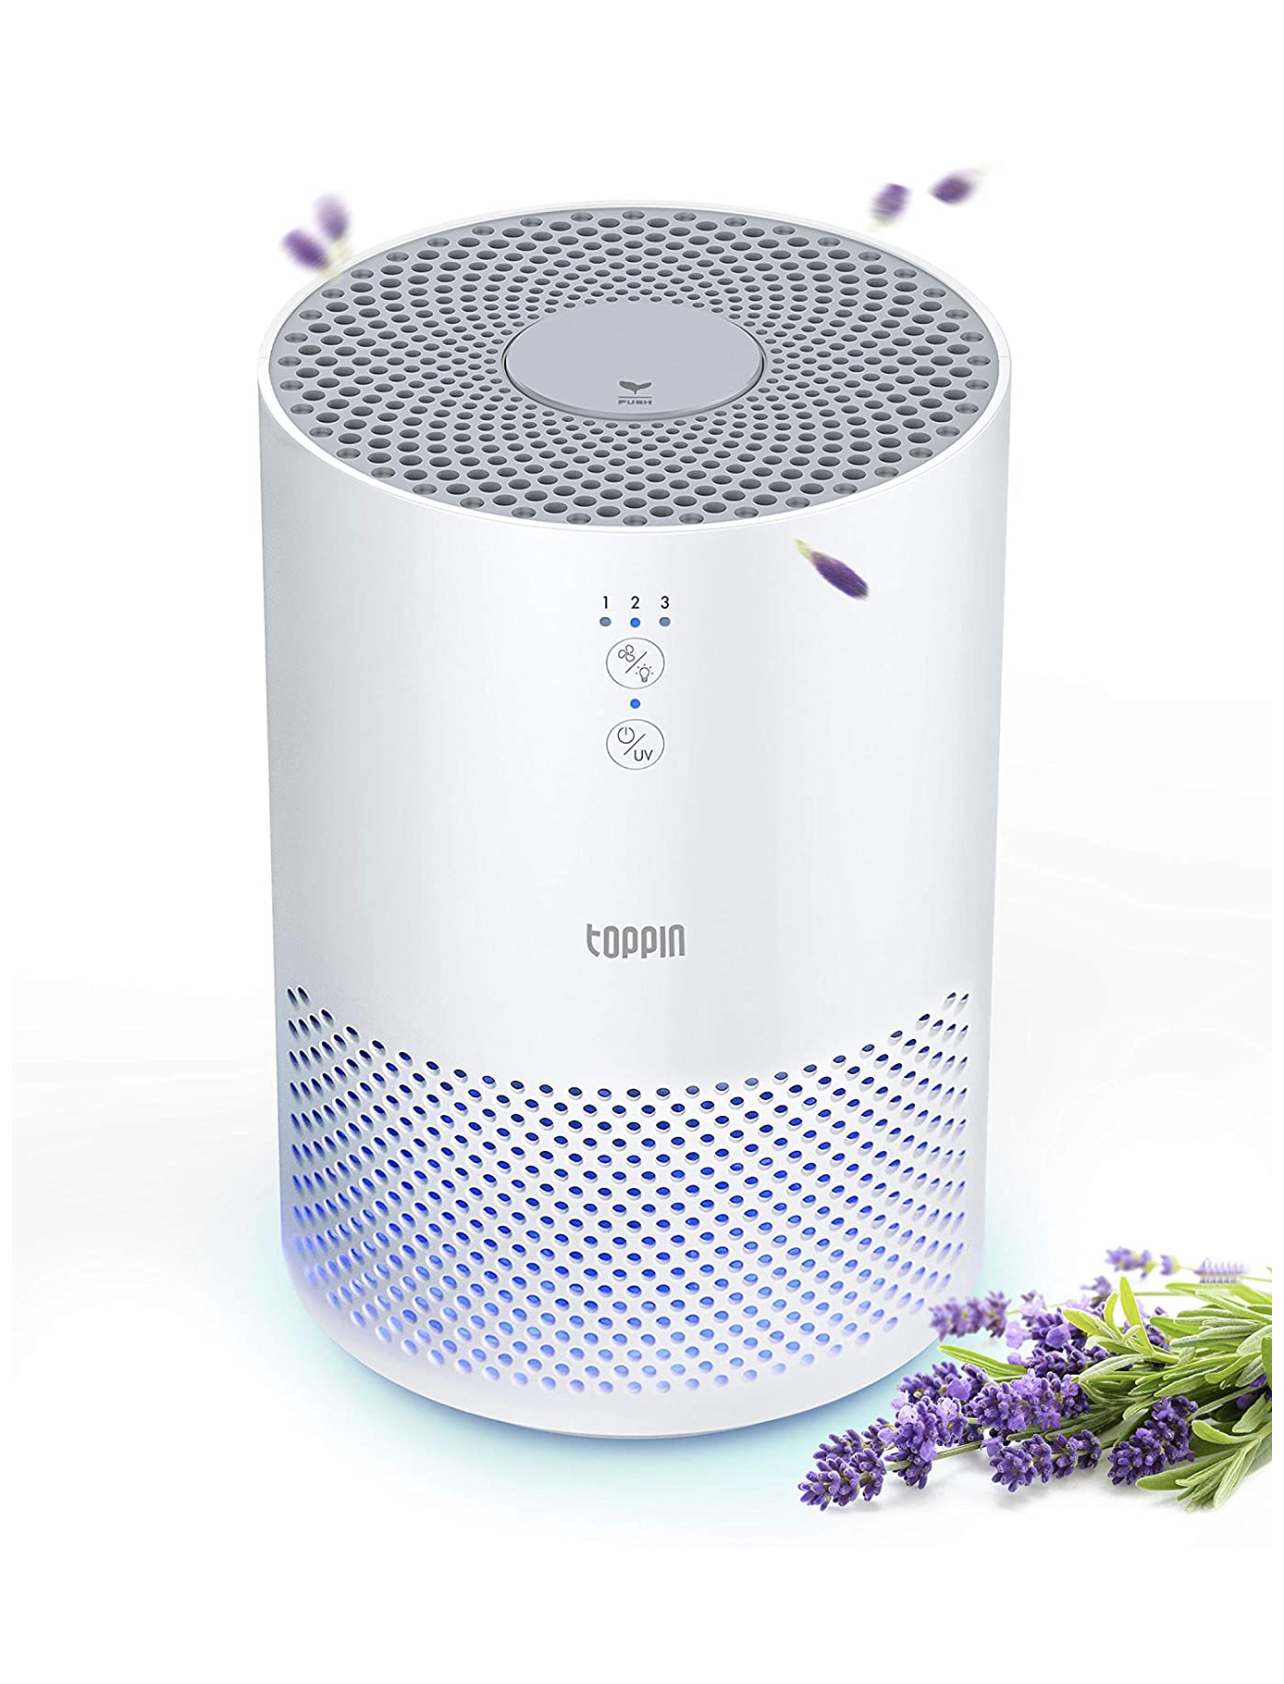 TOPPIN HEPA Air Purifiers for Home with Fragrance Sponge UV Light Pollen Pet Hair Dander Smoke Dust Airborne Contaminants Odors Home Air Cleaner with Filter Night Light - $38.39